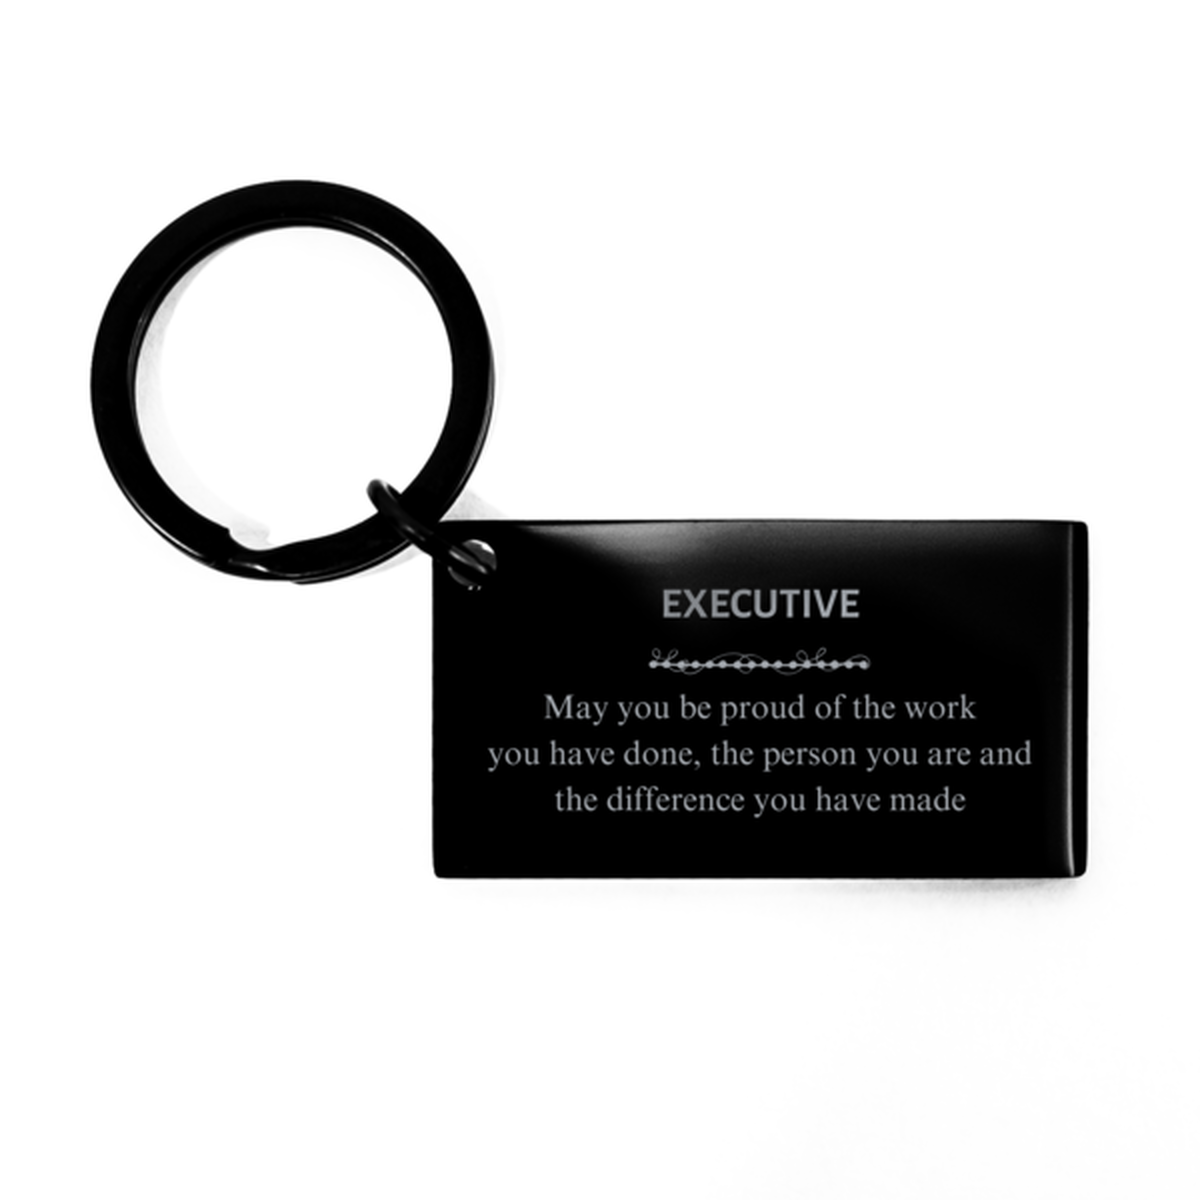 Jeweler May you be proud of the work you have done, Retirement Executive Keychain for Colleague Appreciation Gifts Amazing for Executive